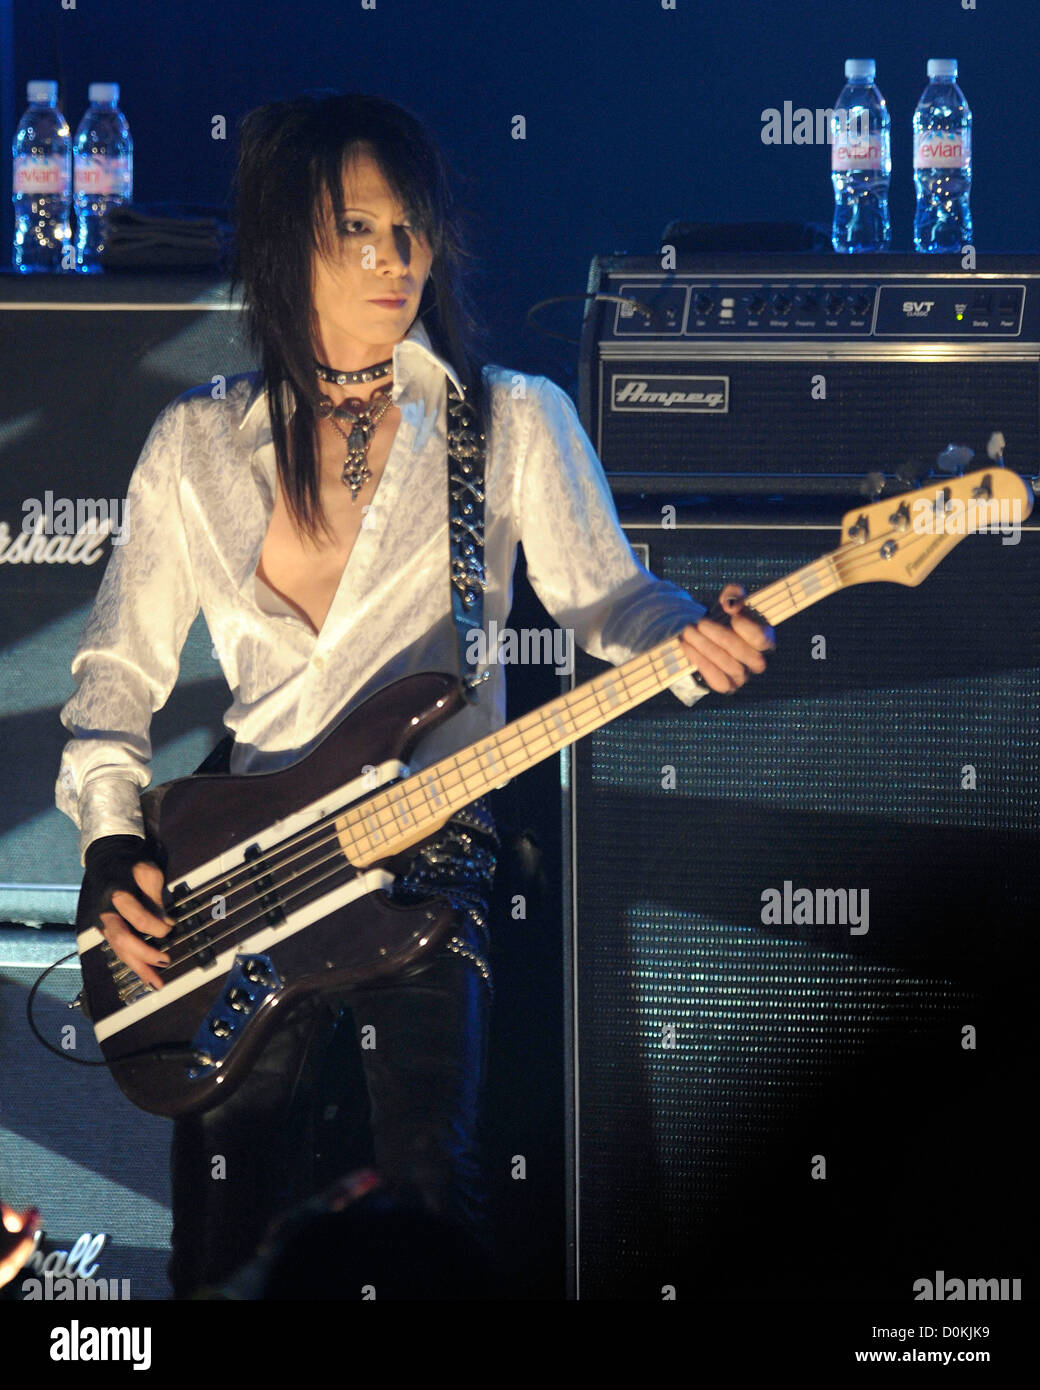 Hiroshi Heath Morie Of X Japan Performing On Stage At Massey Hall Toronto Canada 07 10 10 Stock Photo Alamy